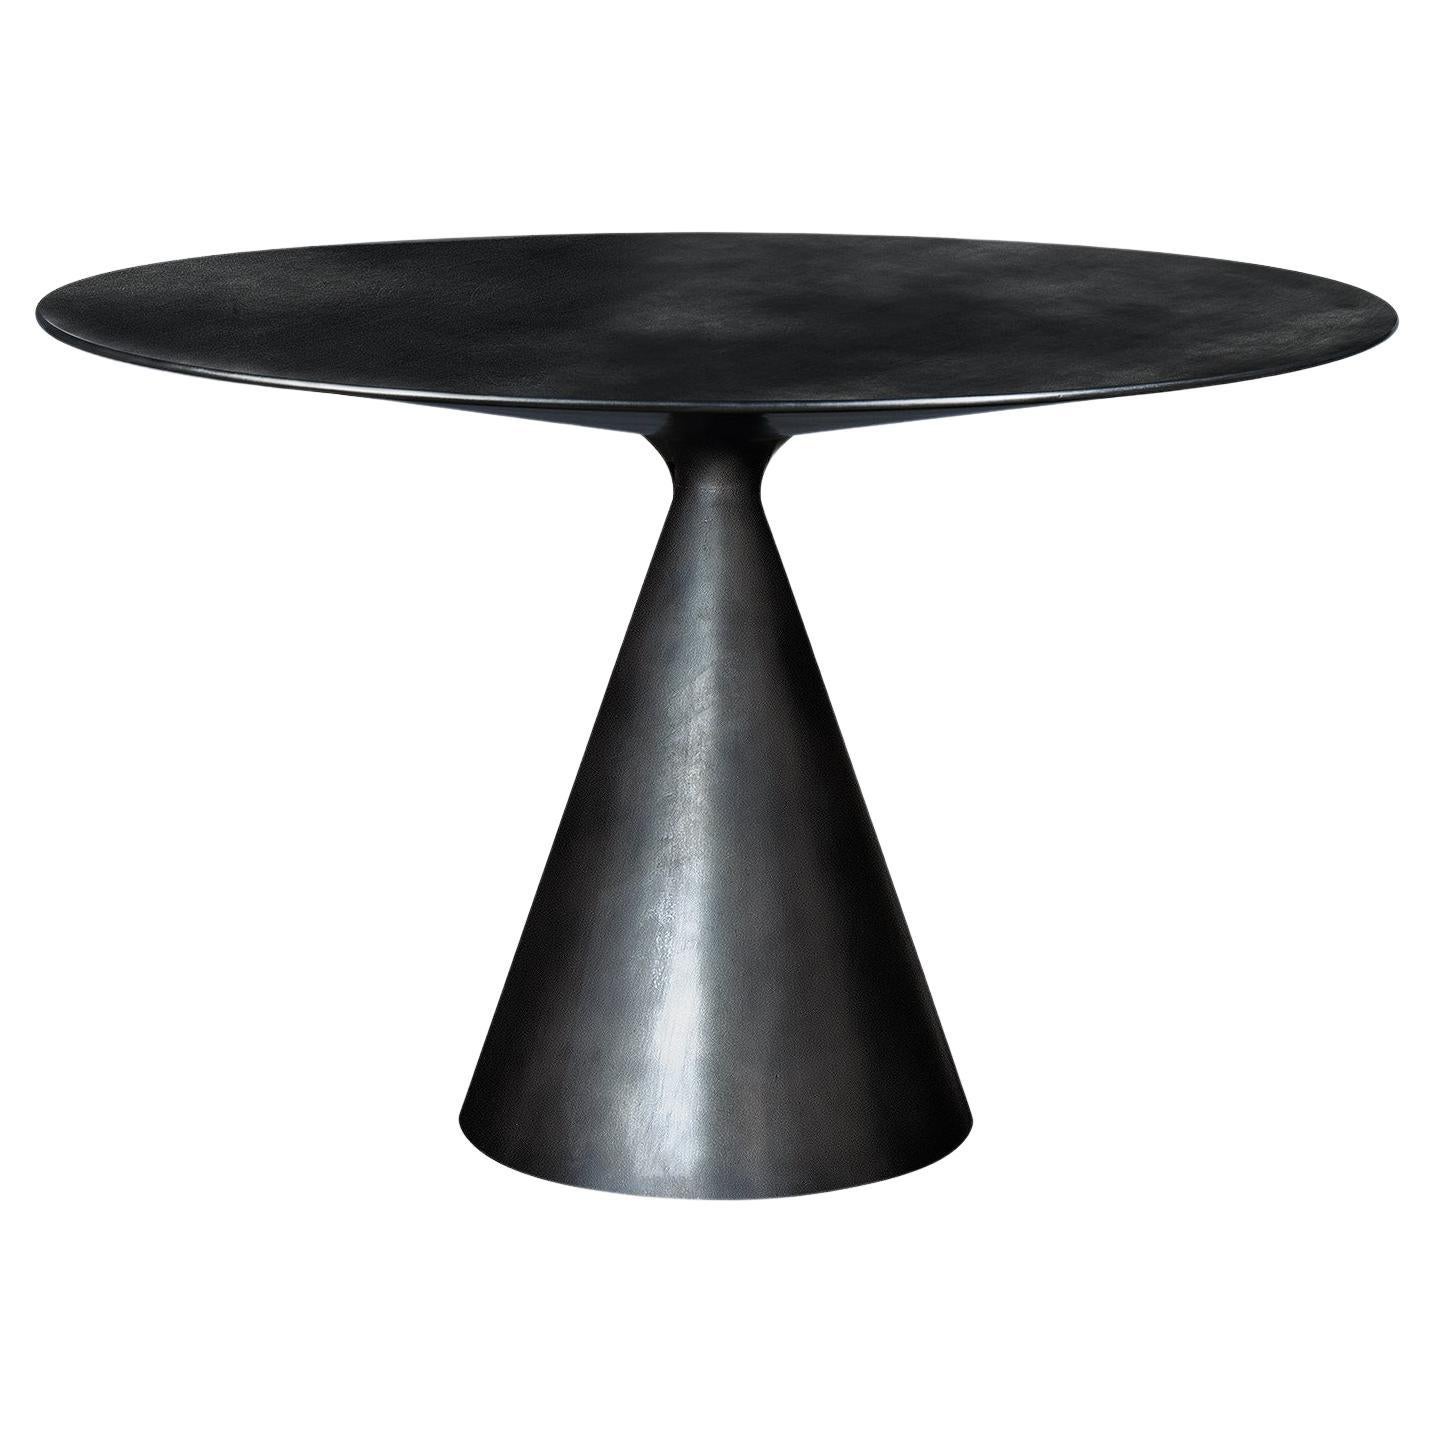 Modern Barzio Wood Table with Conical Base, Finish Looks like Polished Metal For Sale